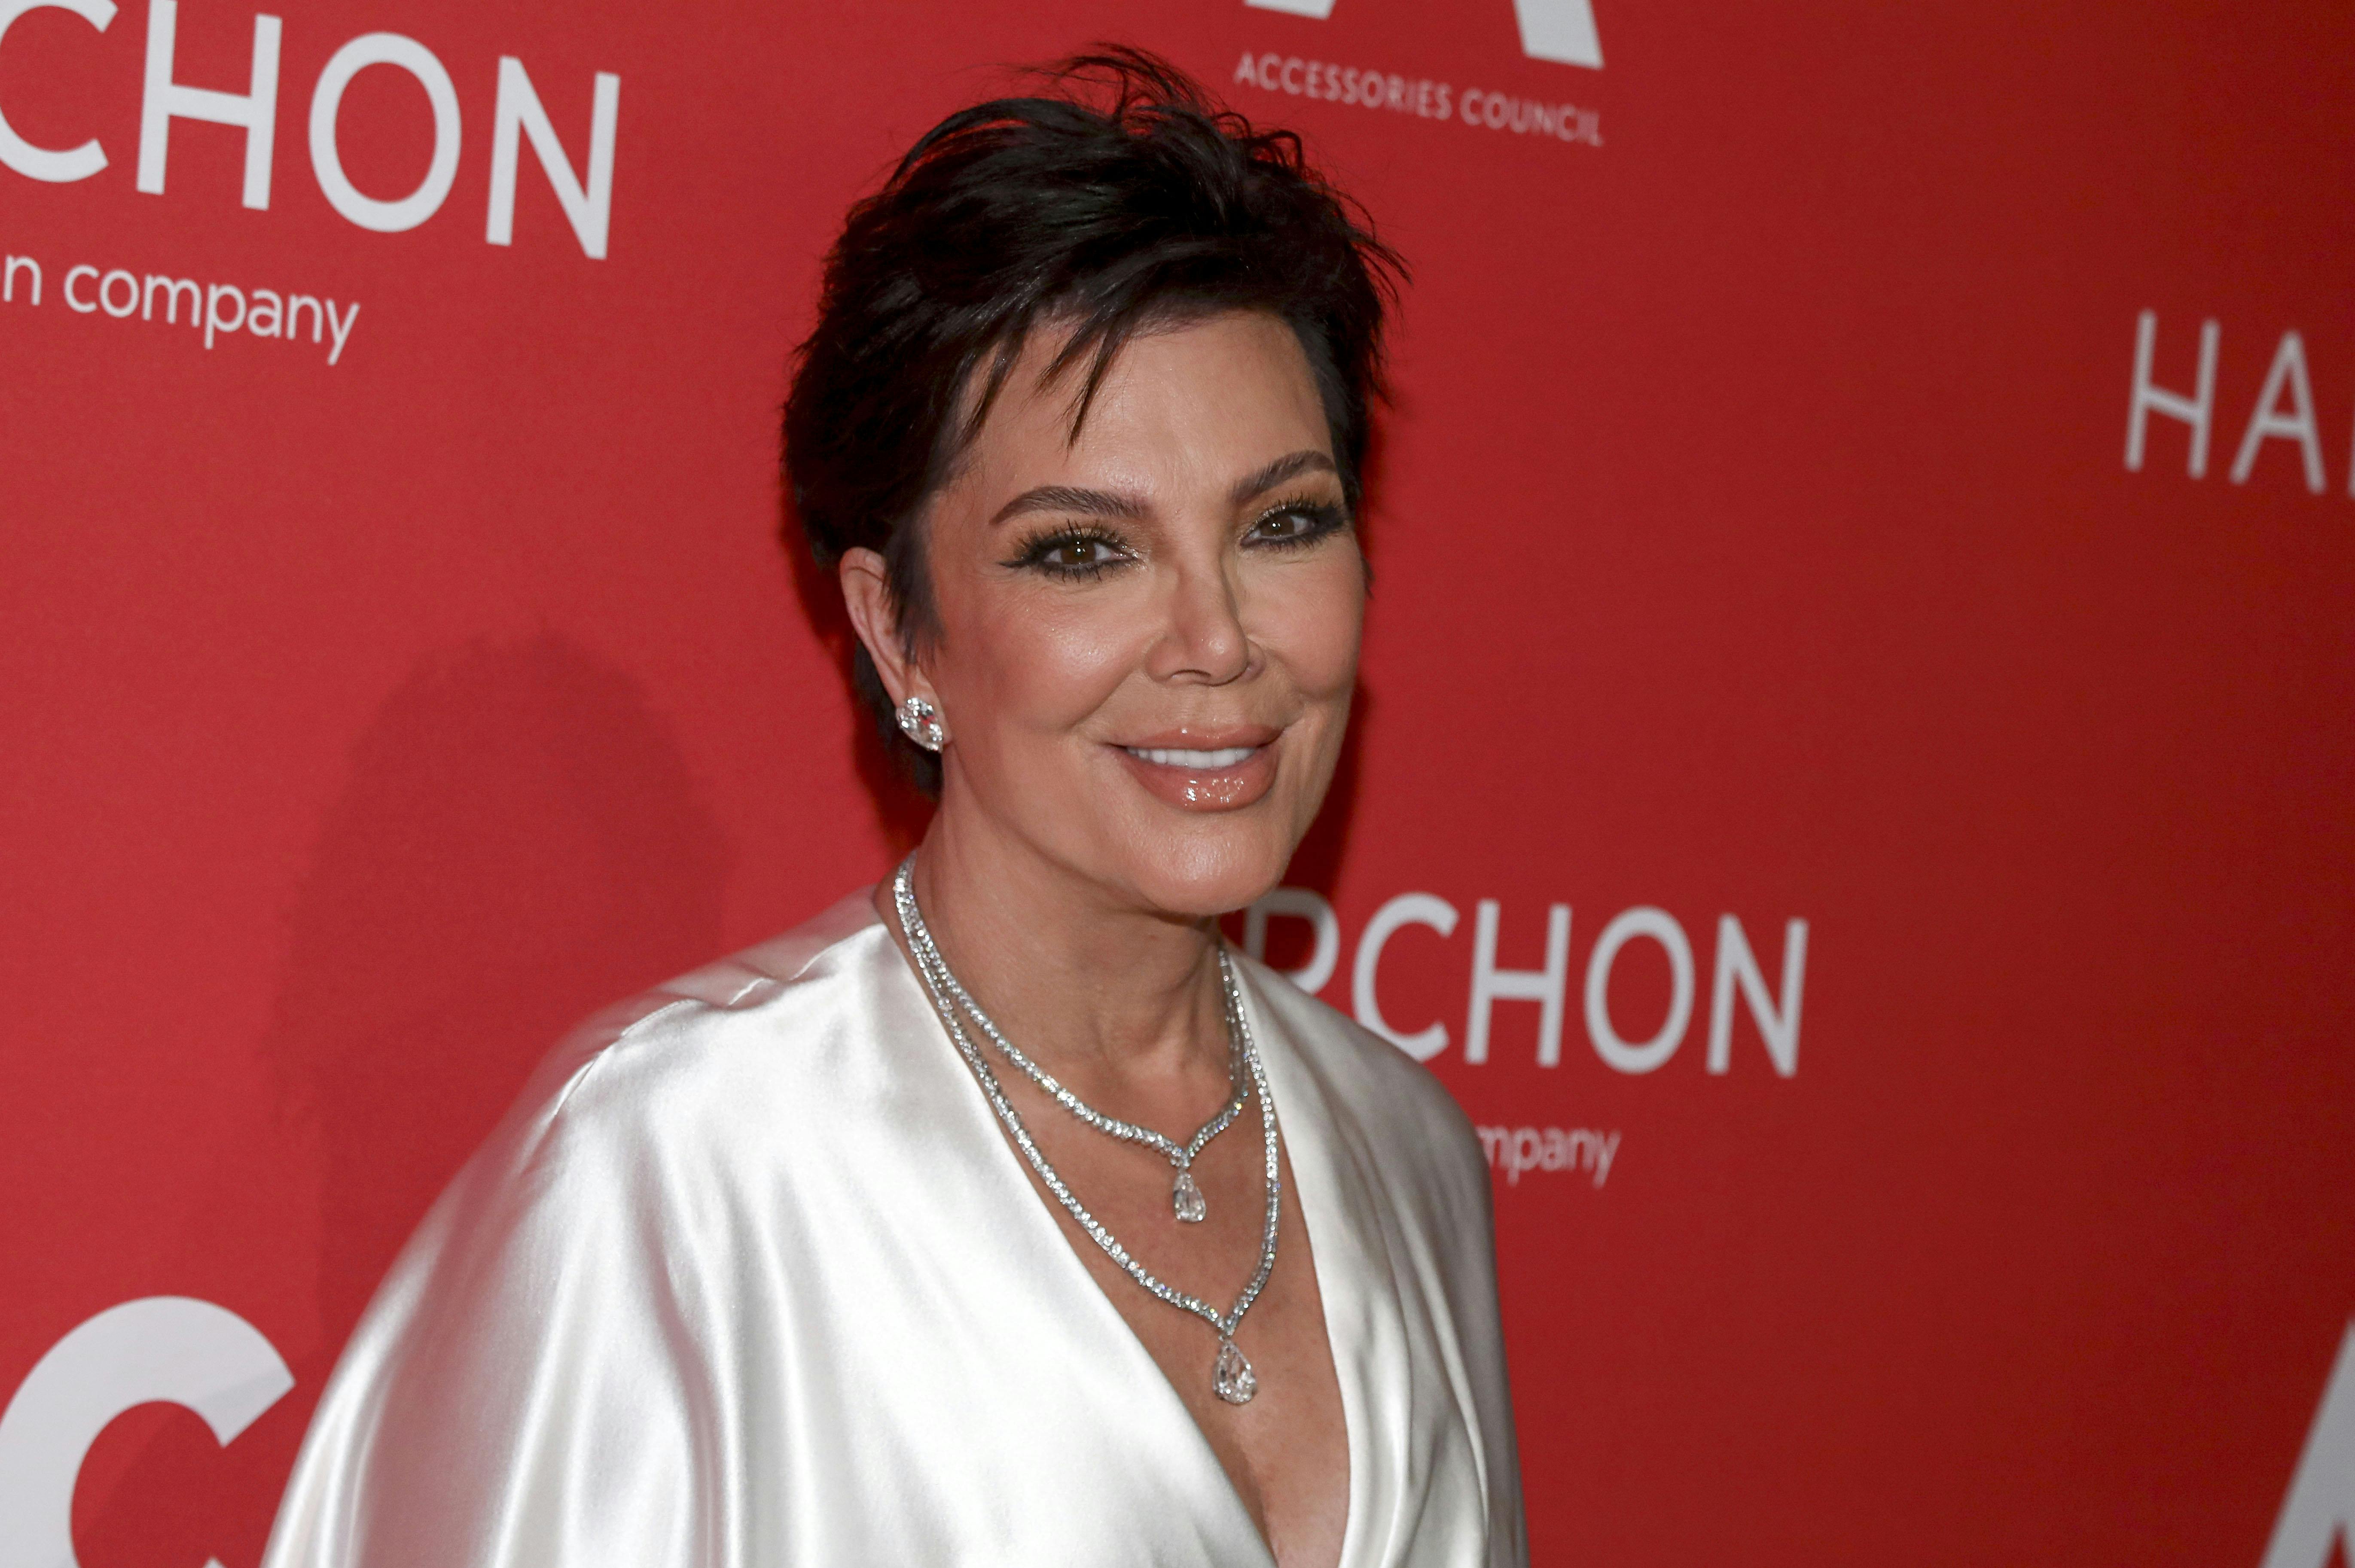 Television personality Kris Jenner attends the Accessories Council 27th annual ACE Awards at Cipriani 42nd Street on Wednesday, May 3, 2023, in New York. (Photo by Andy Kropa/Invision/AP)